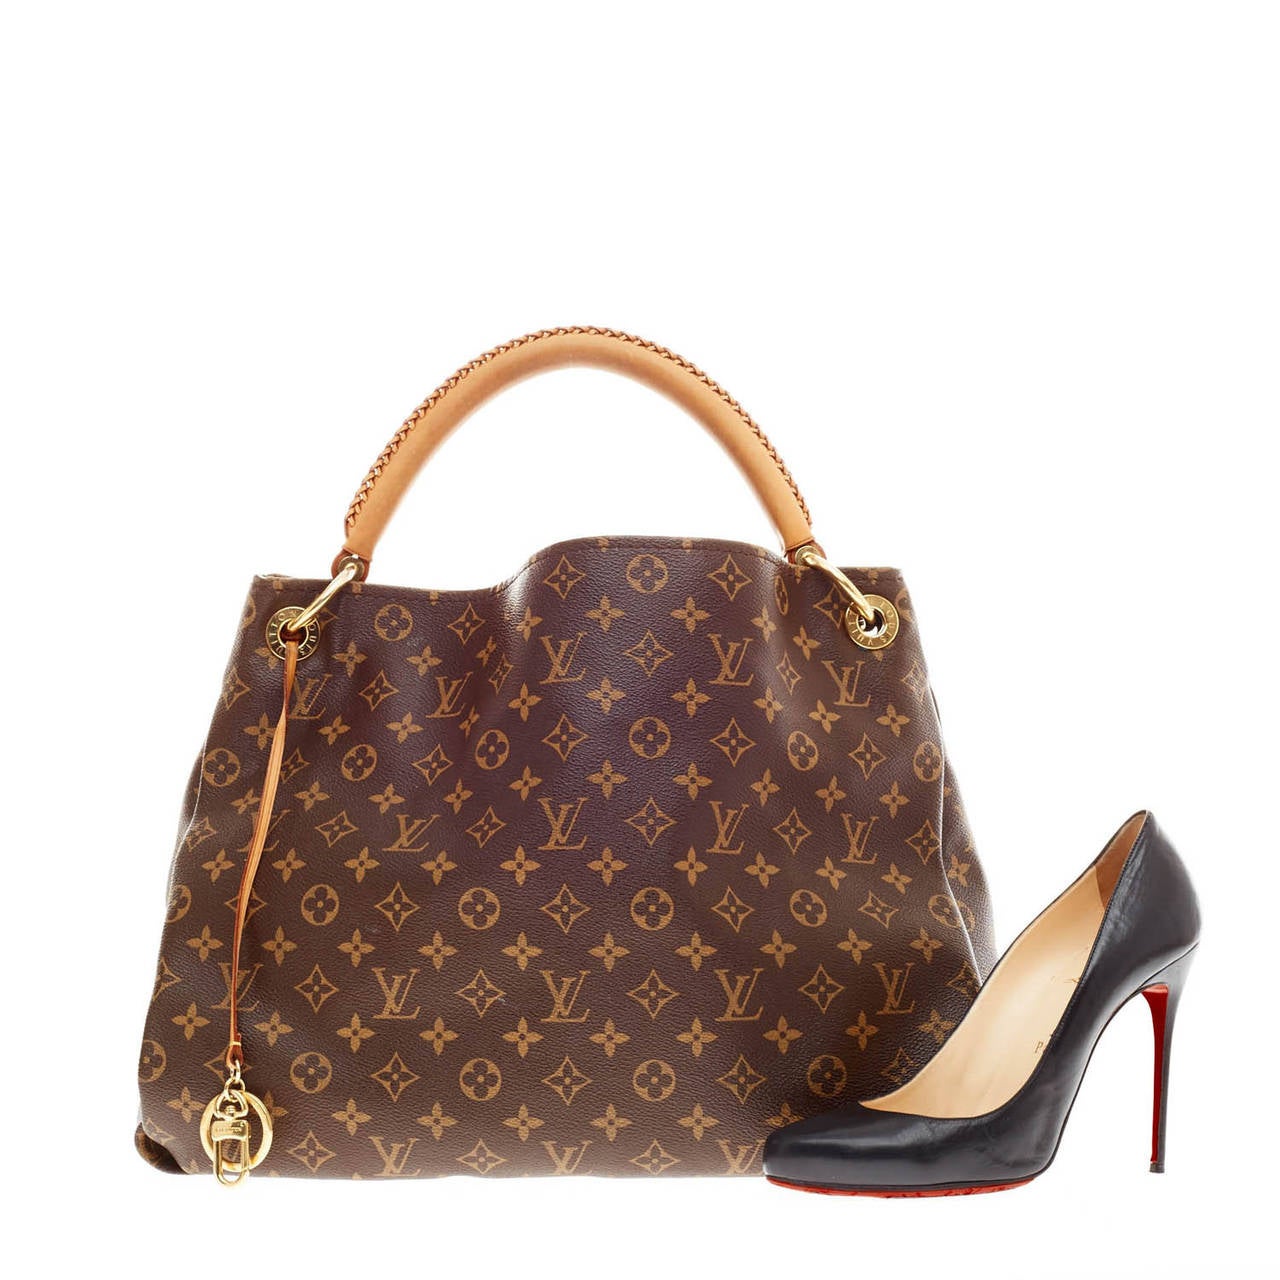 This authentic Louis Vuitton Artsy Monogram Canvas size MM is an elegant and iconic bag that adds a stylish flair to any outfit. Crafted from Louis Vuitton's iconic monogram canvas and featuring a single looped hand-crafted leather handle, this